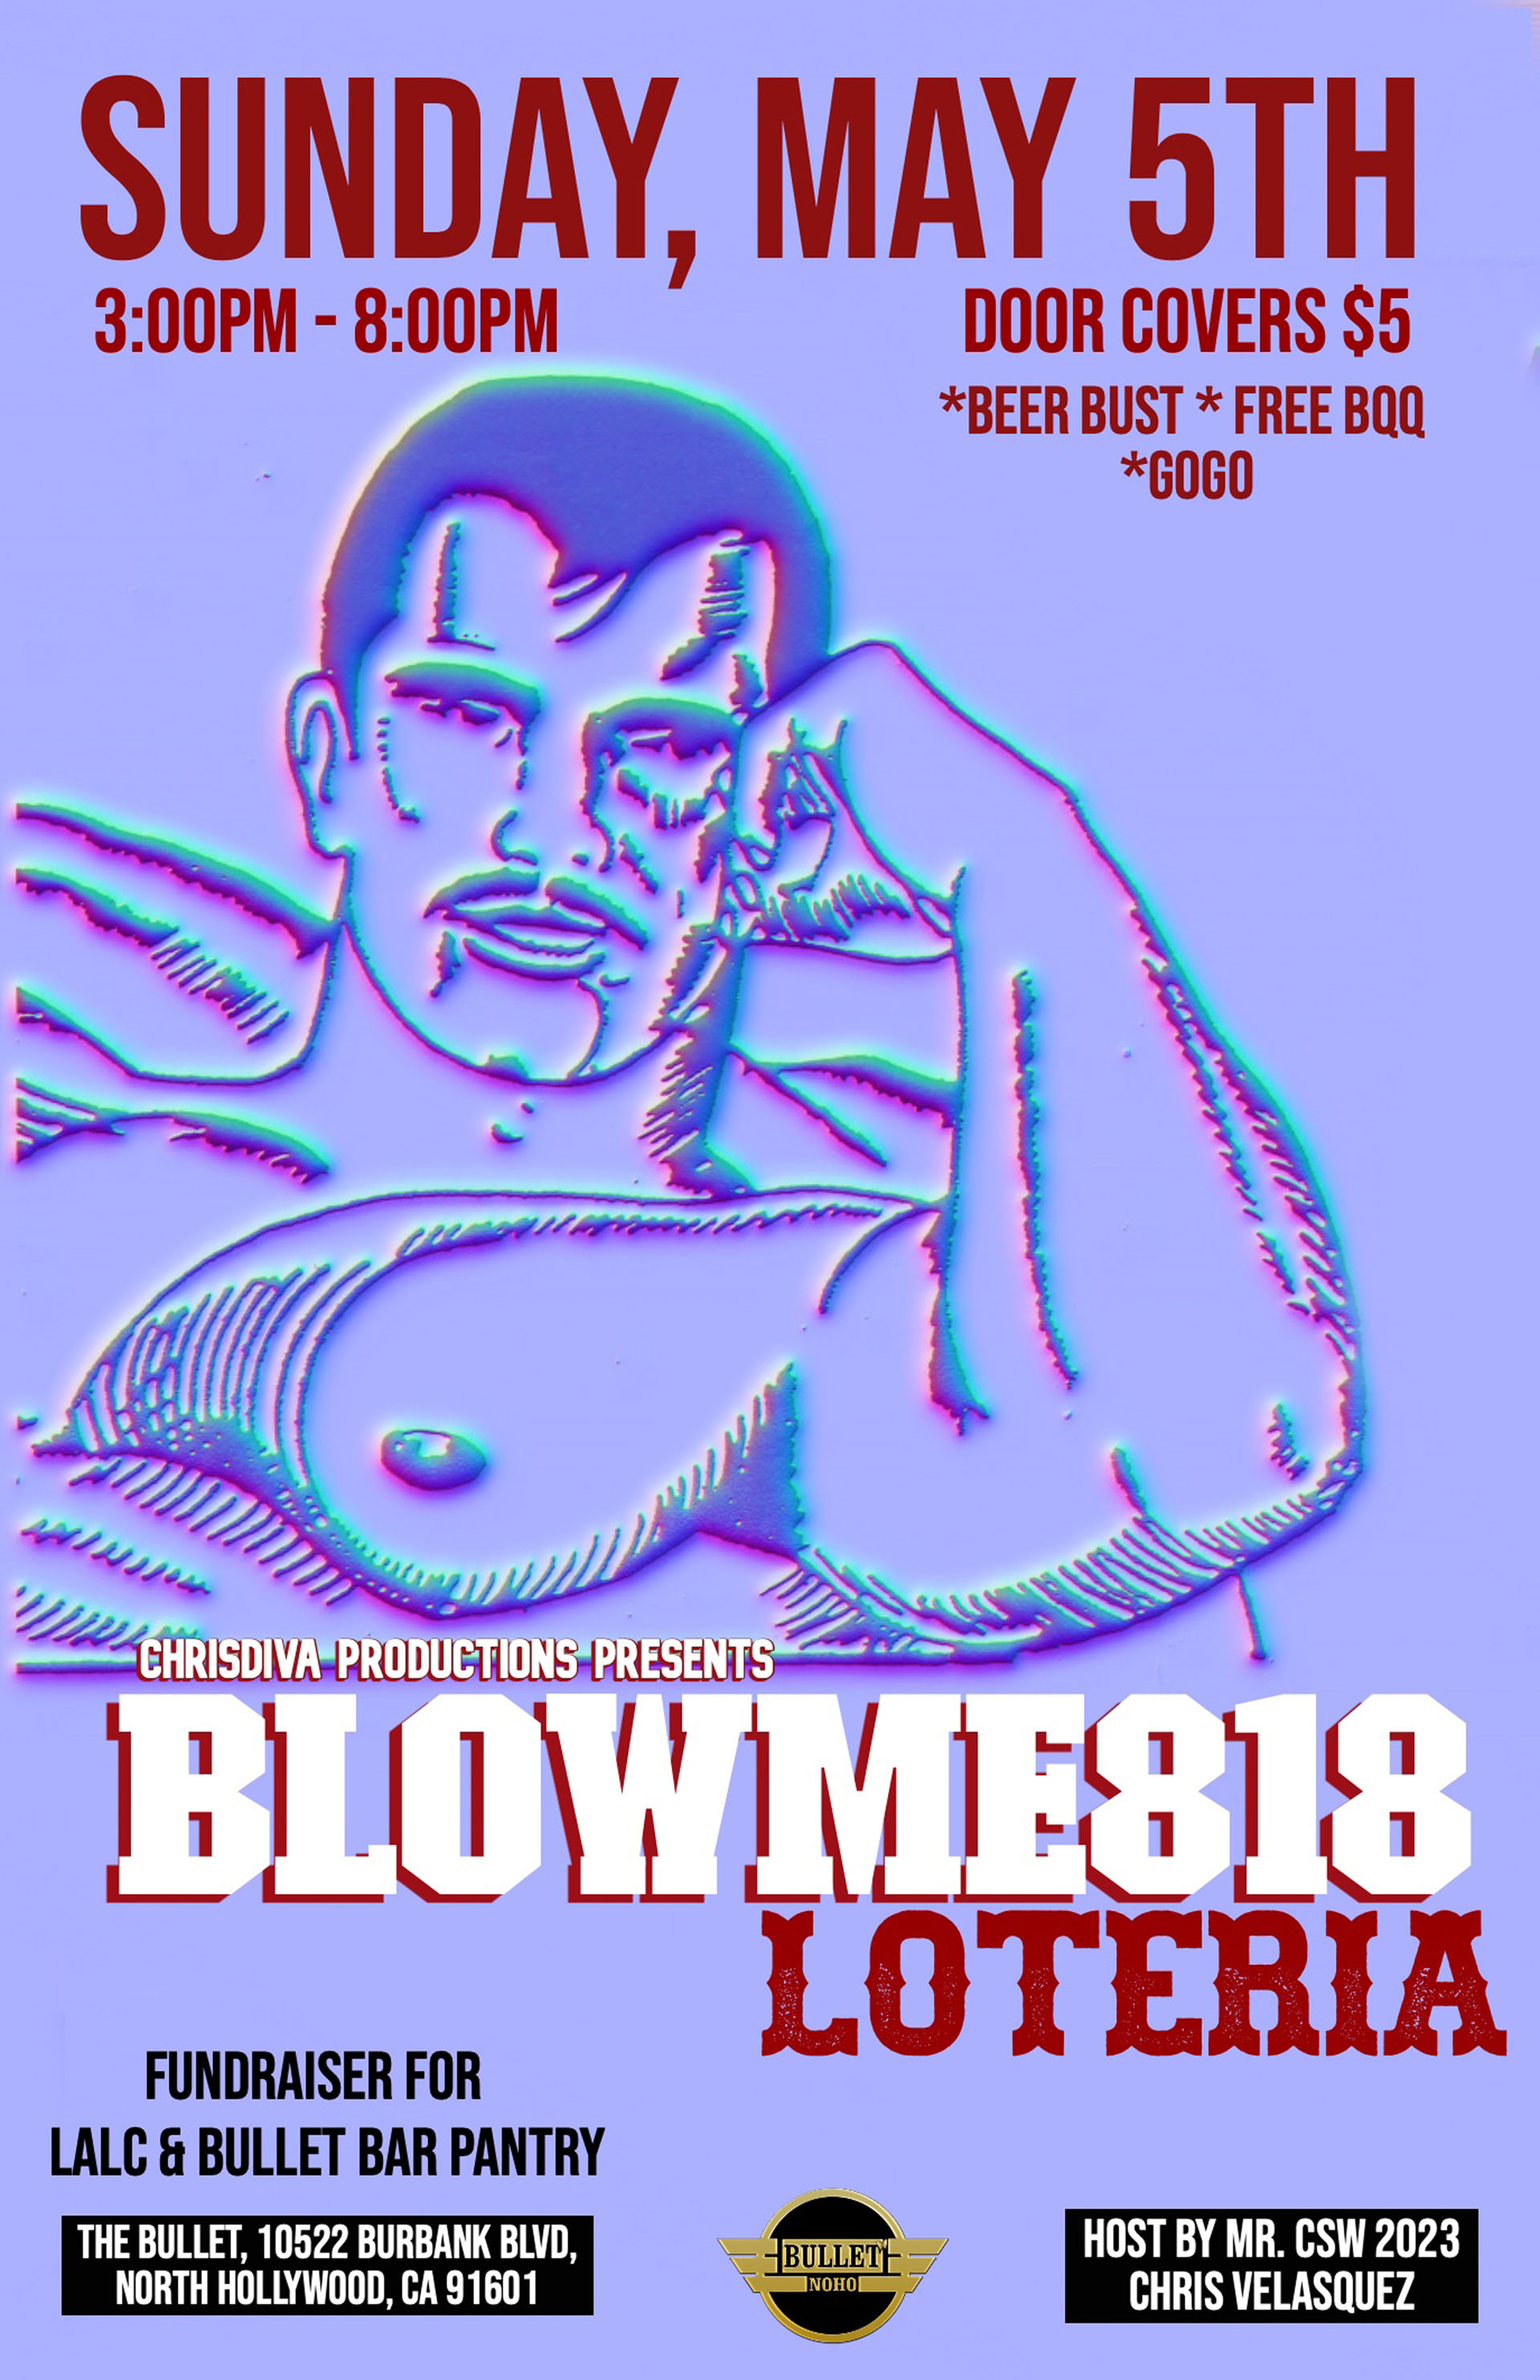 BLOWME818 Hosted by MR. CSW 2023, Christopher Velasquez: Sunday, 05/05/24 from 3PM-8PM. Fundraiser for LALC & BULLET BAR PANTRY. Featuring DJ CMR! $5 cover.